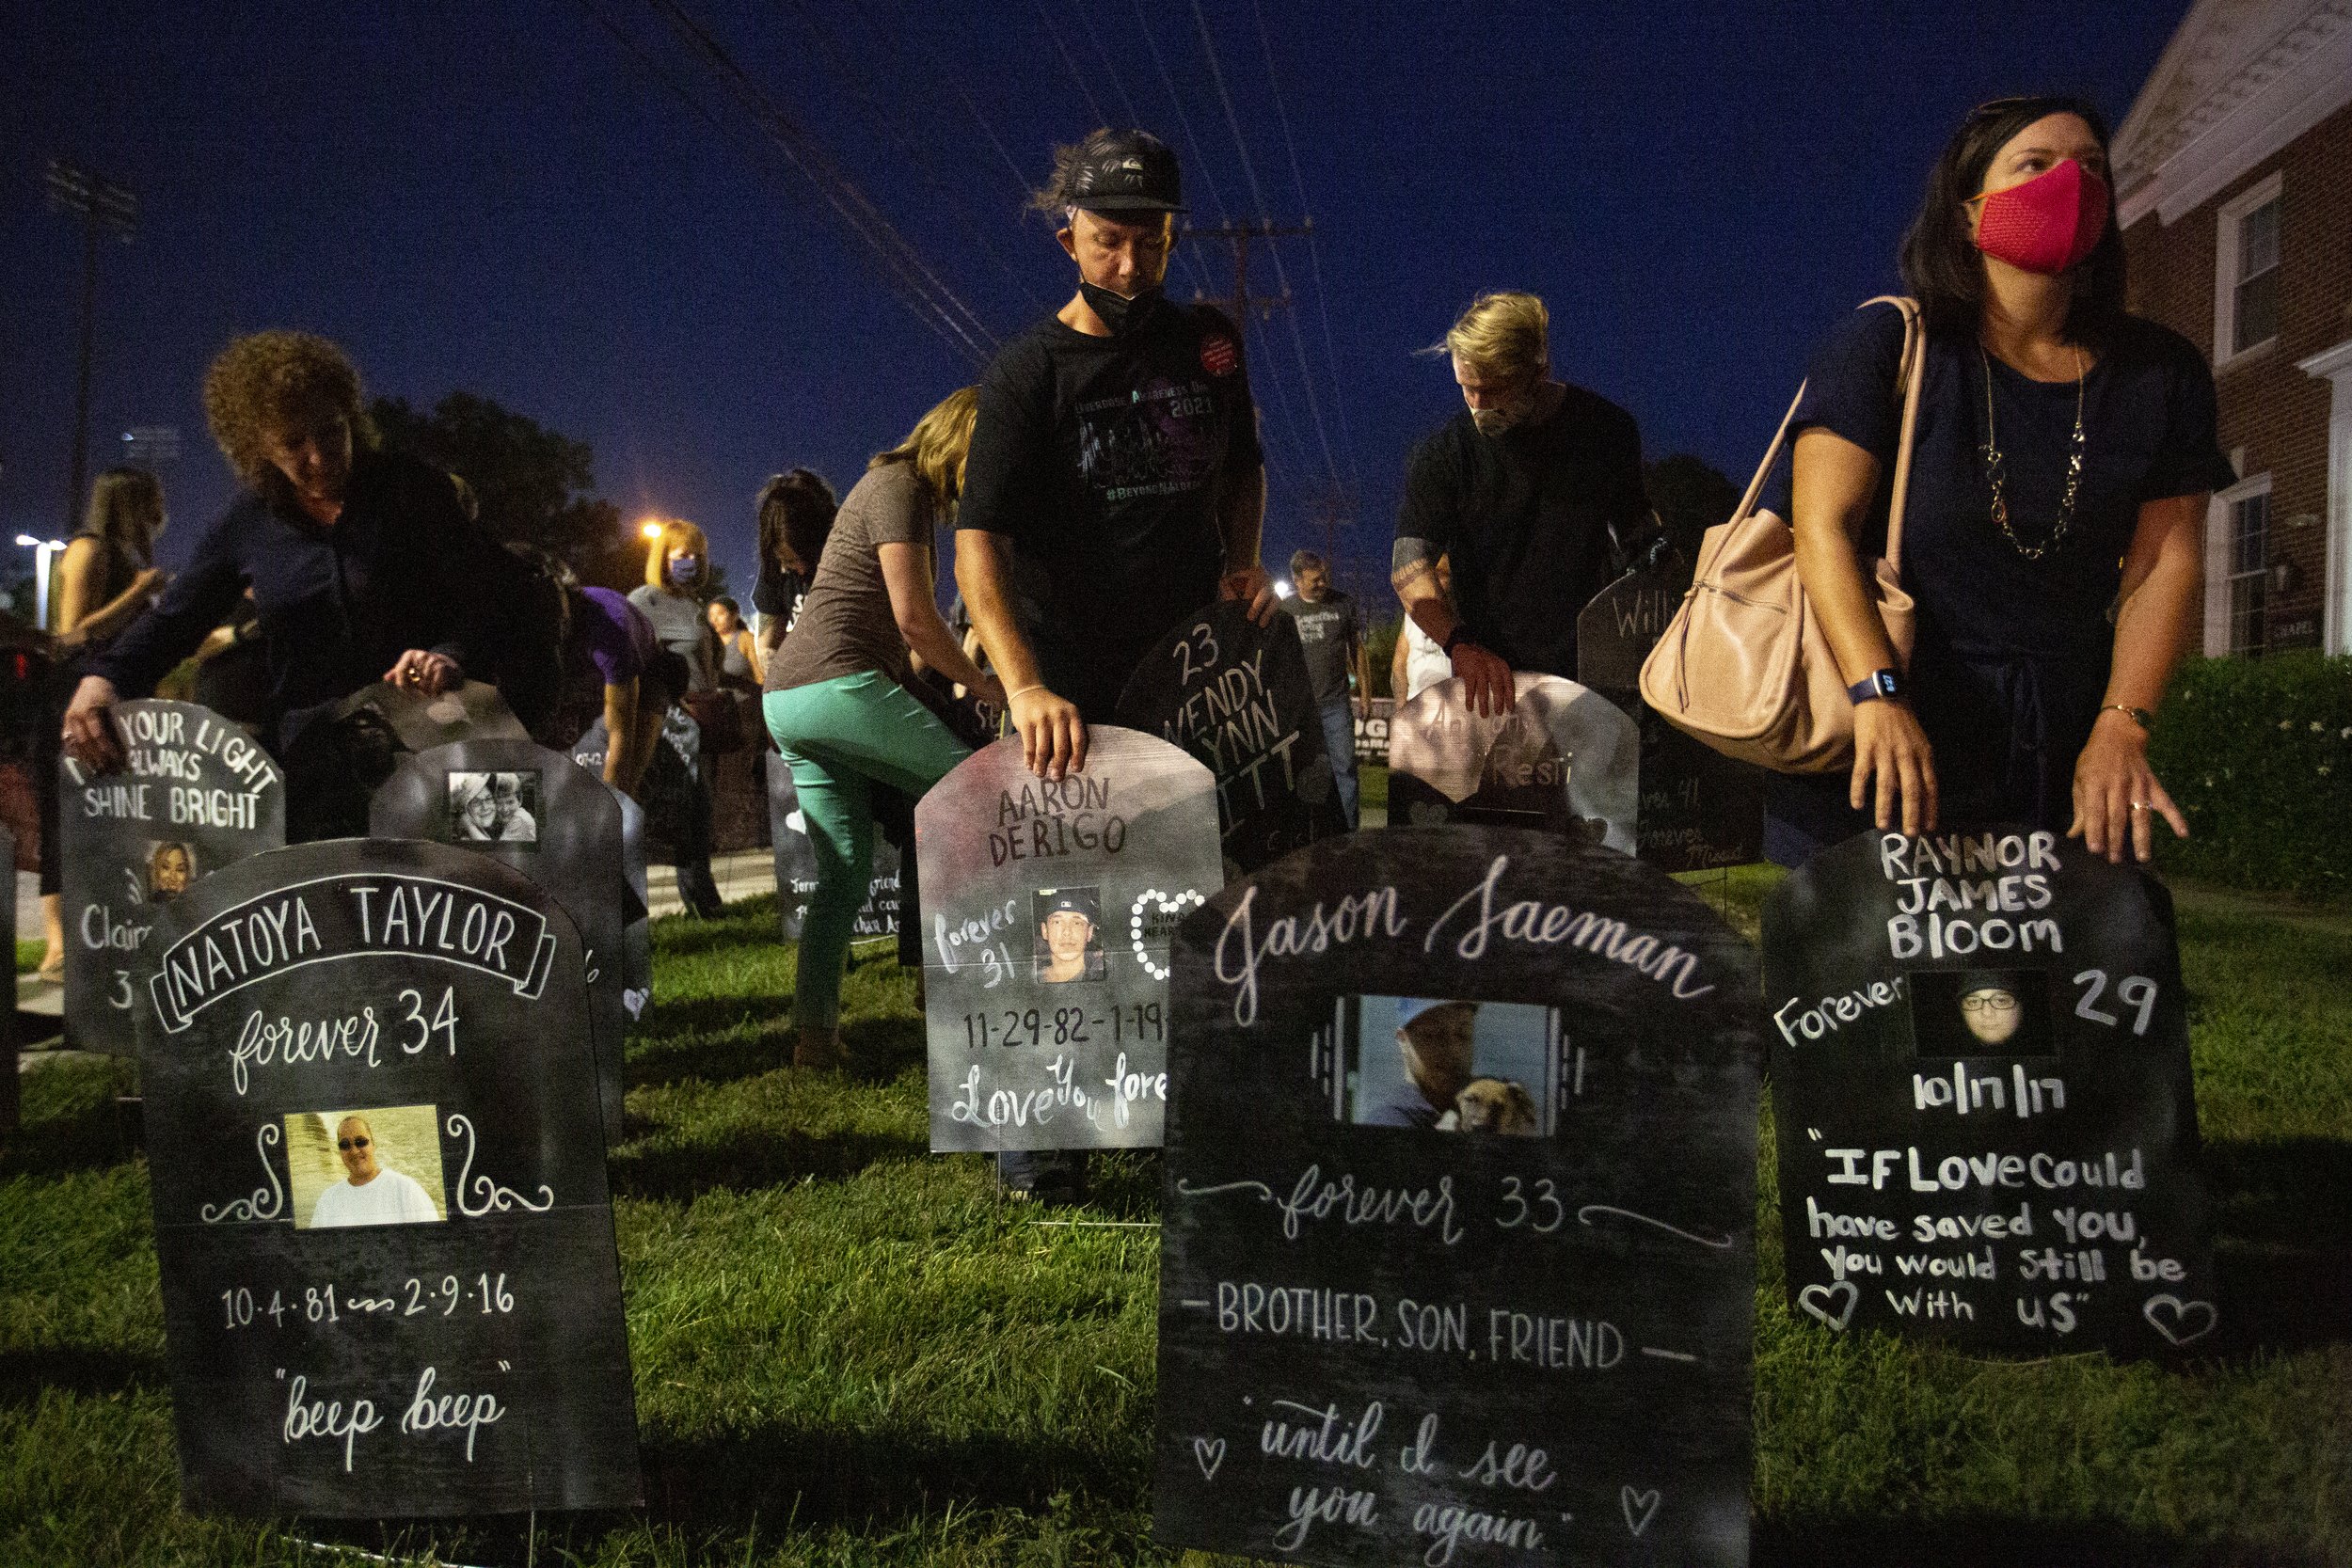  In an act of remembrance attendees of the Overdose awareness ceremony place makeshift tombstones of those lost to overdose in the grassy area out in front of the College Park Baptist Church in Greensboro, N.C., on Monday, August 30, 2021.  